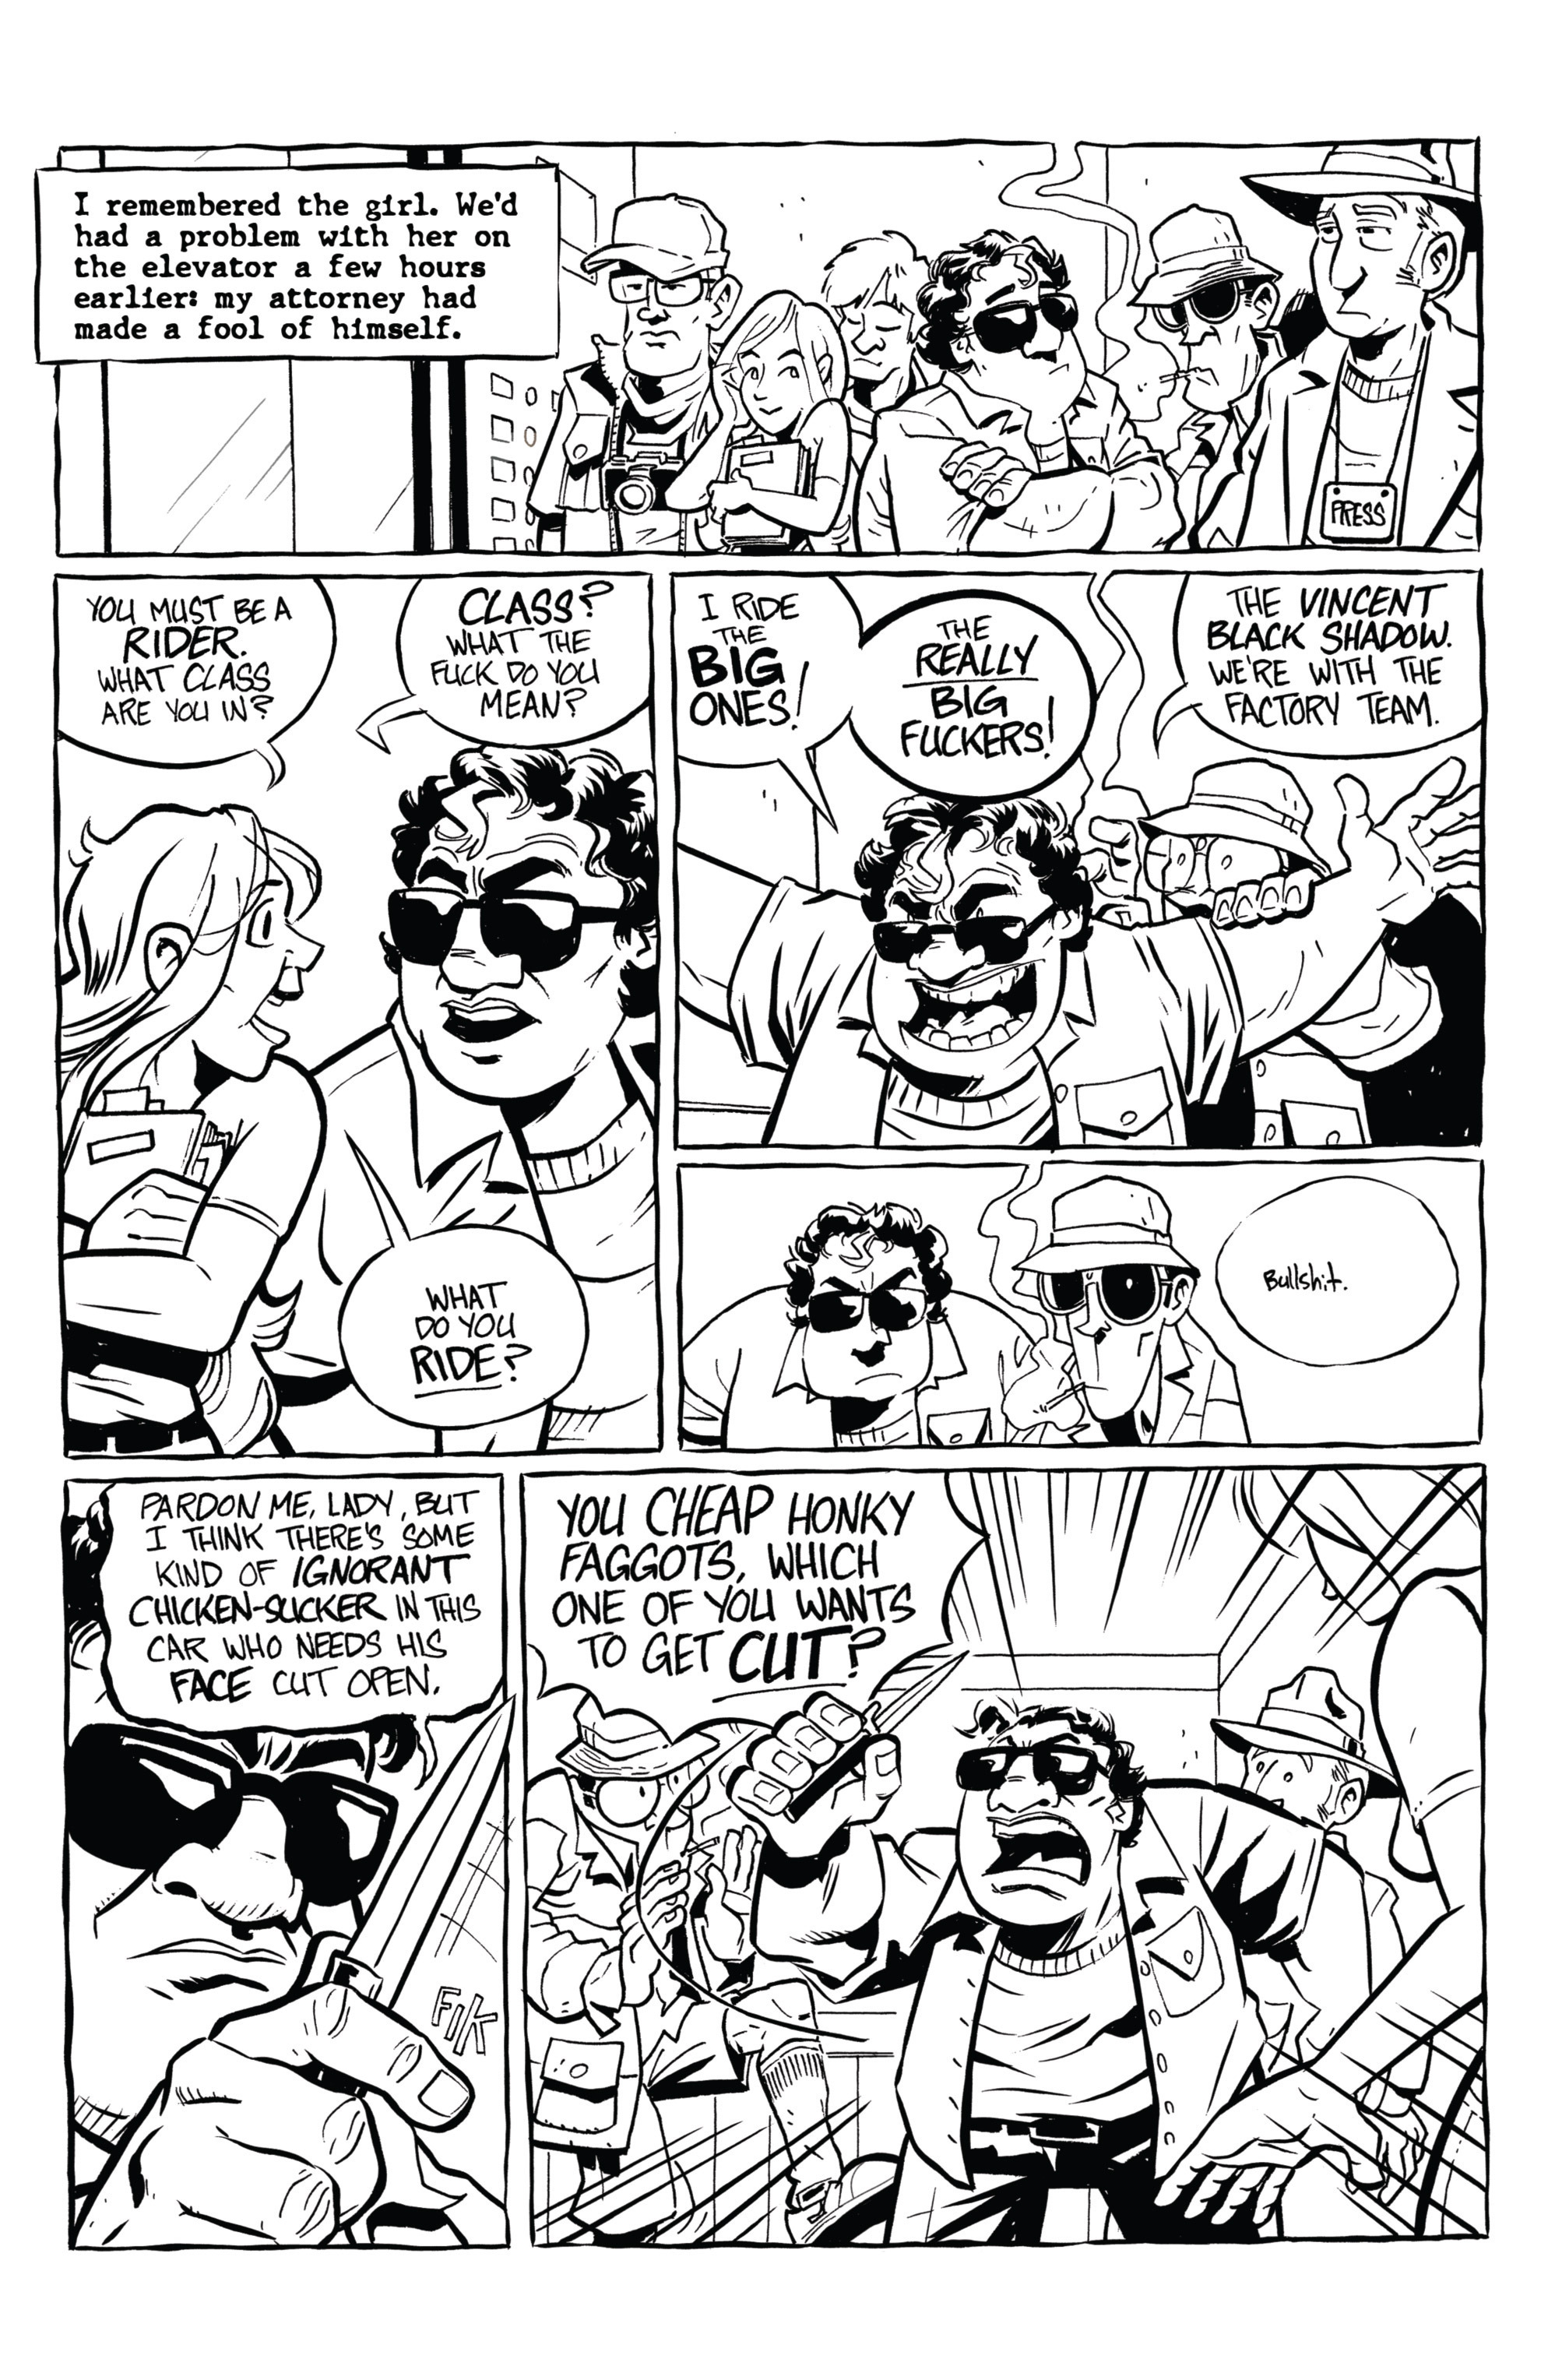 Read online Hunter S. Thompson's Fear and Loathing in Las Vegas comic -  Issue #2 - 19